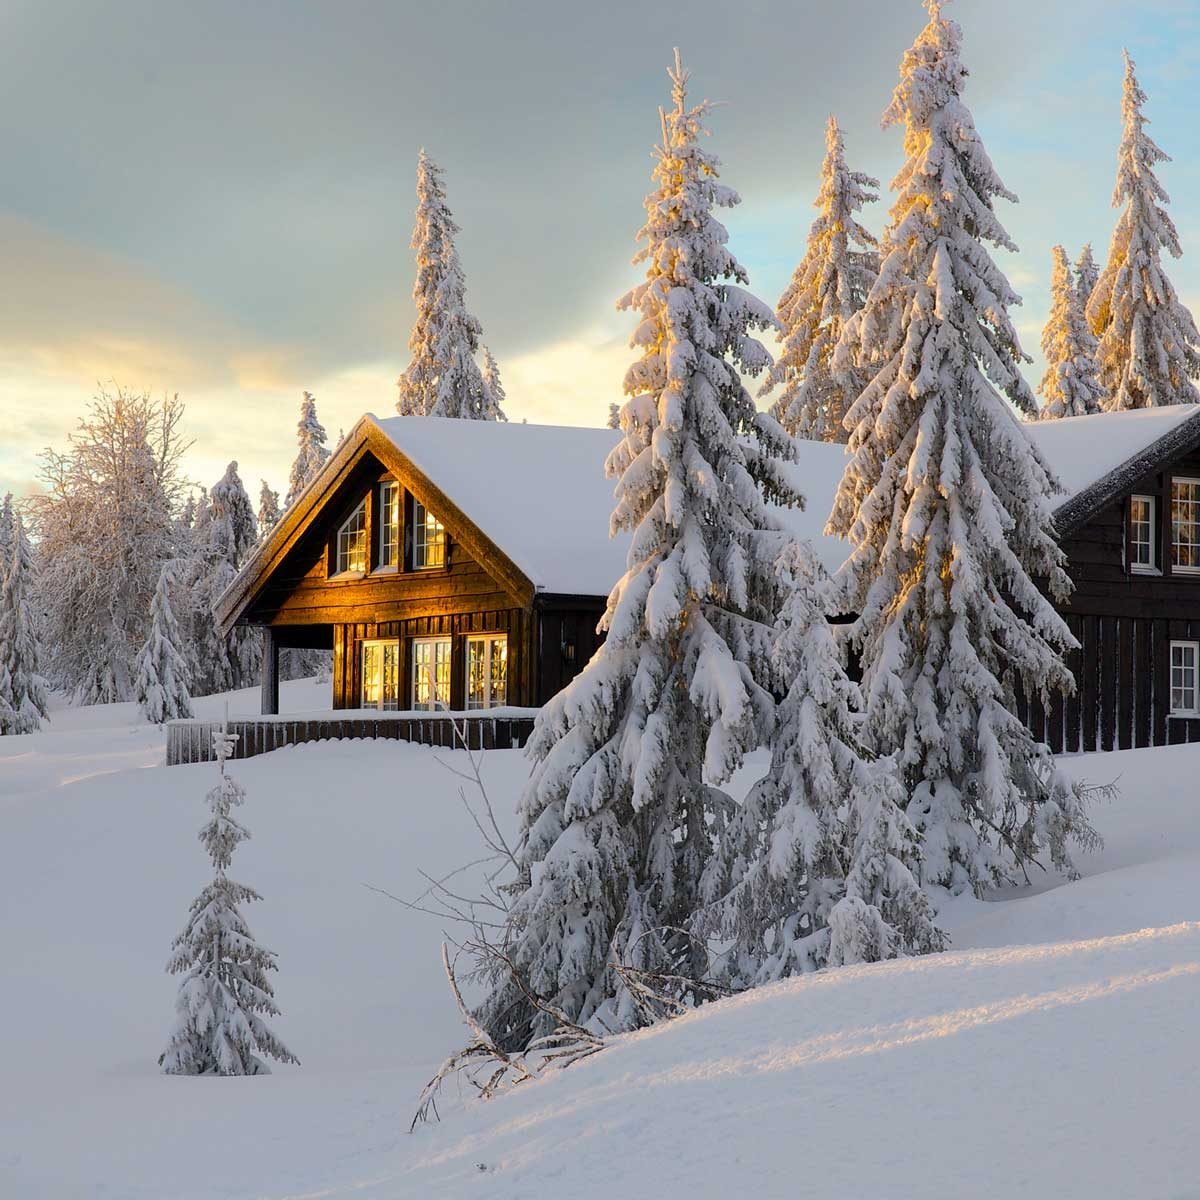 10 Ways to Keep Cold Out This Winter | The Family Handyman